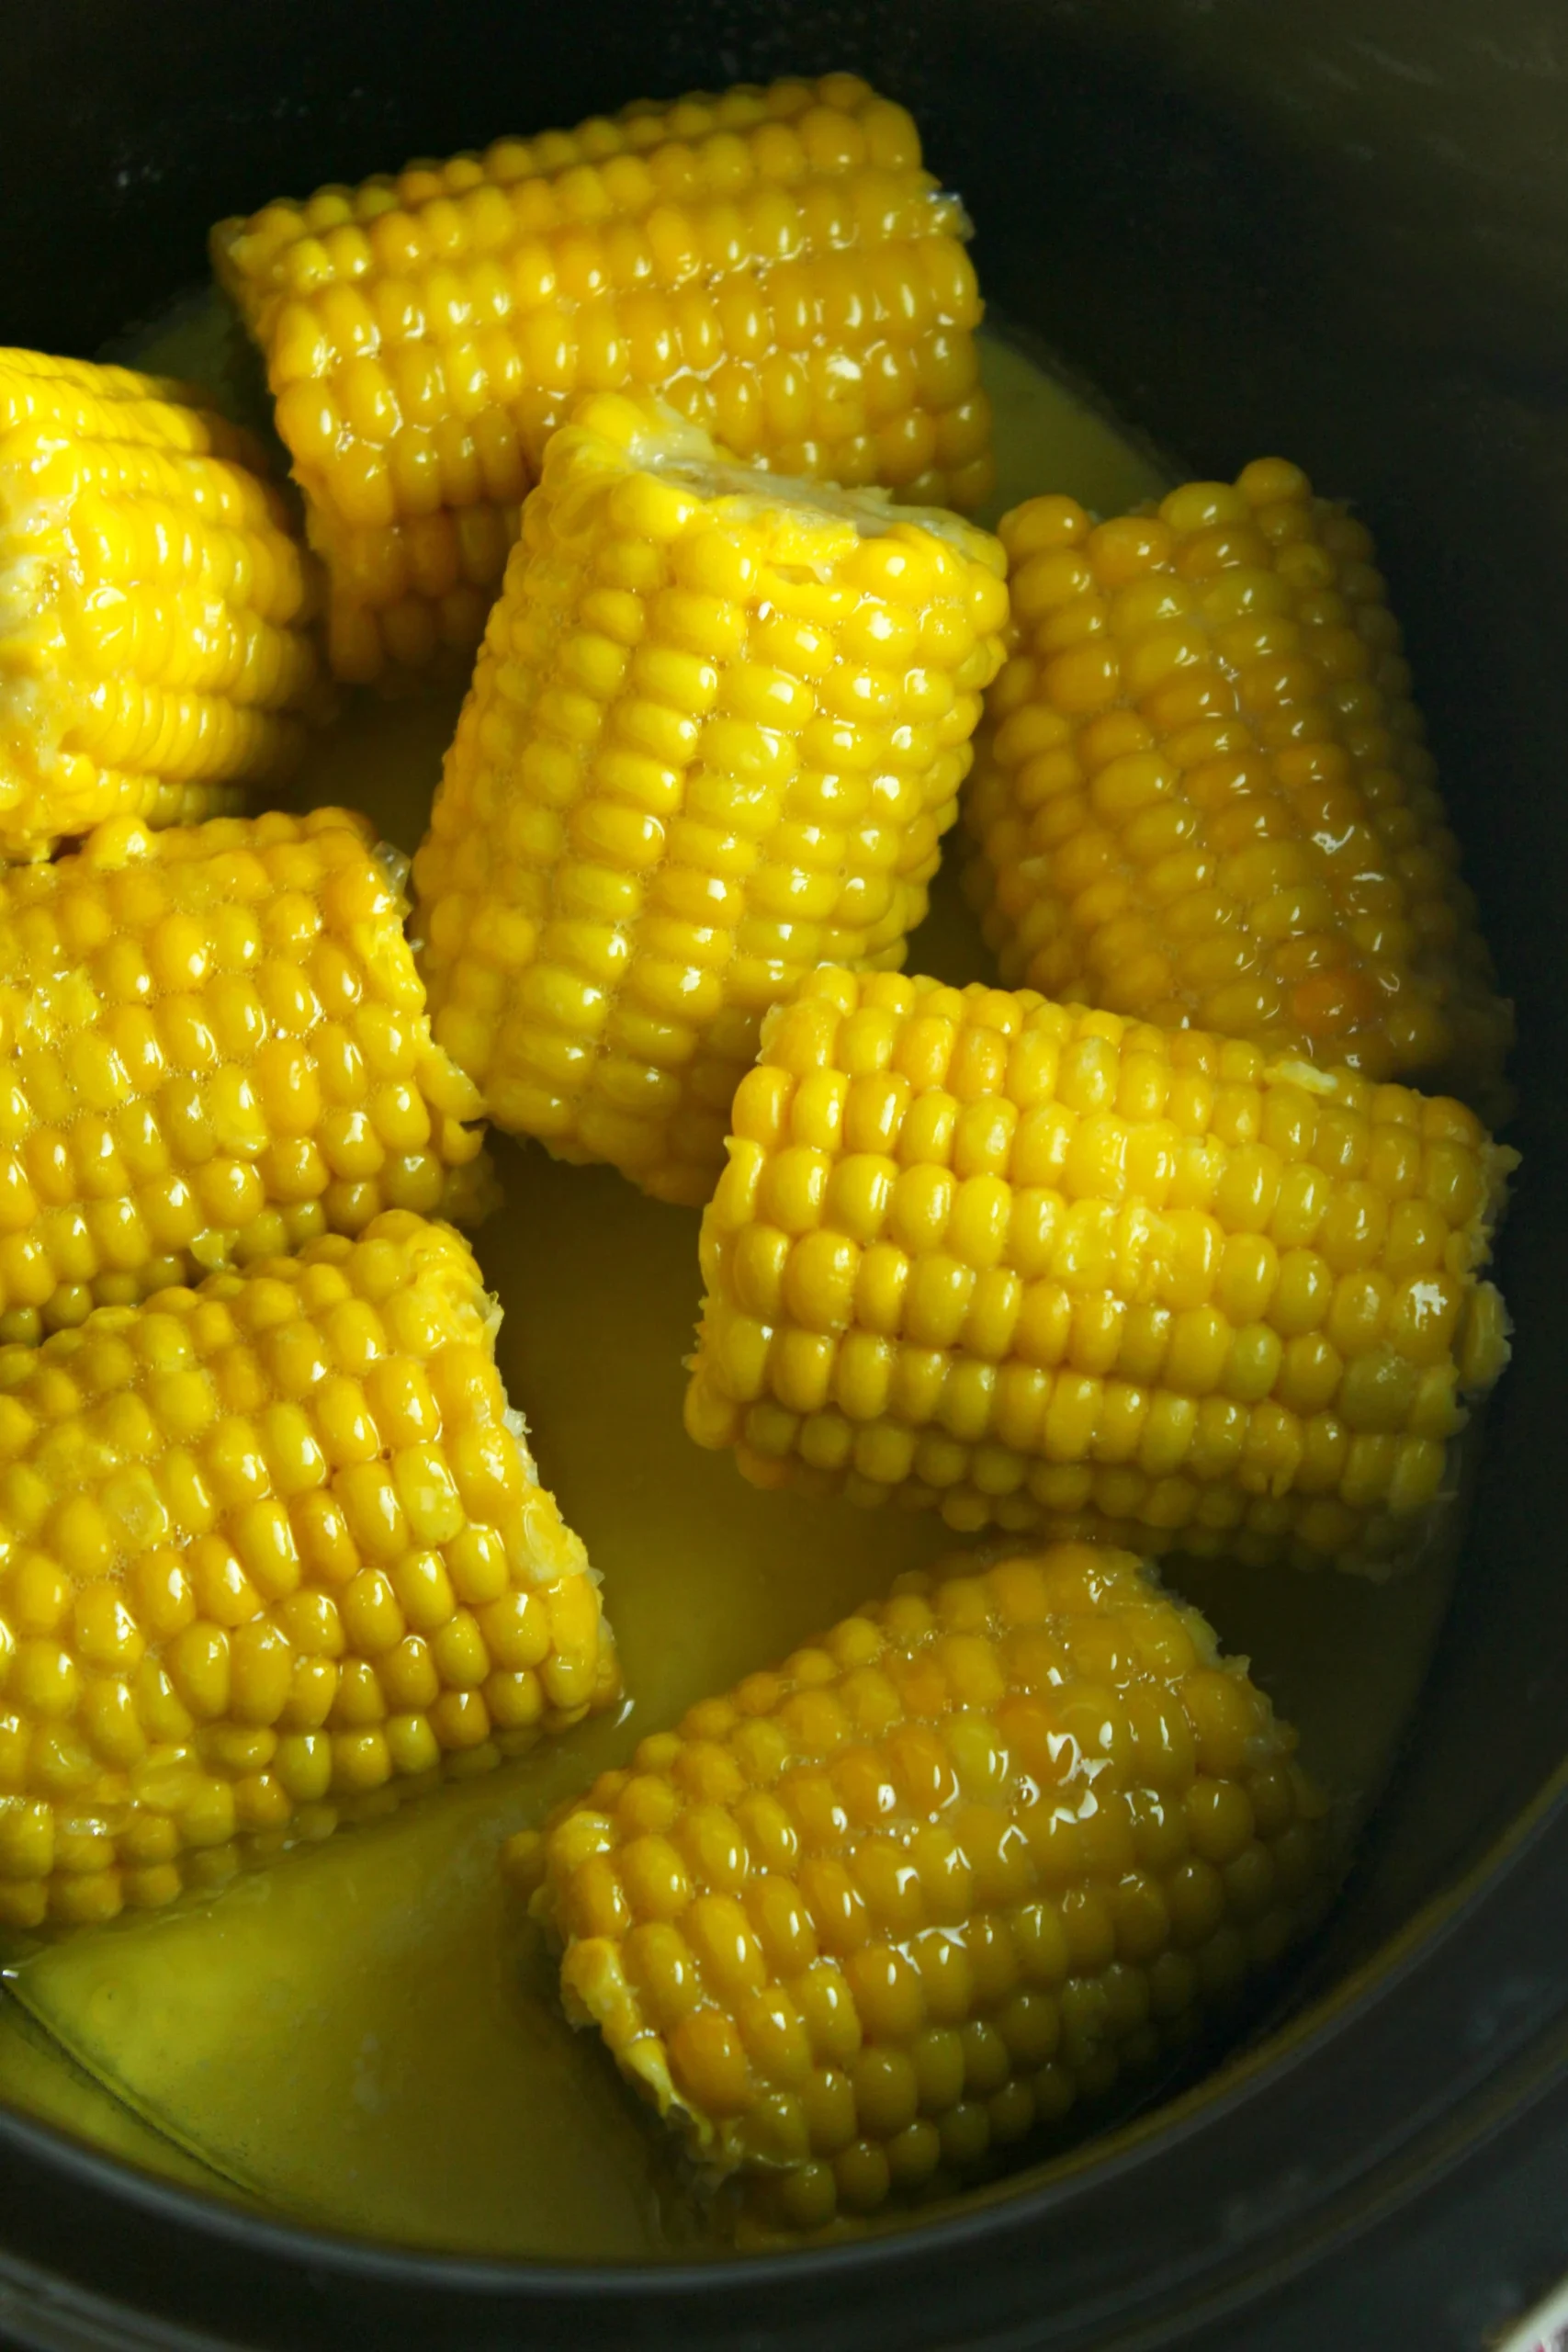 Cooking the Corn